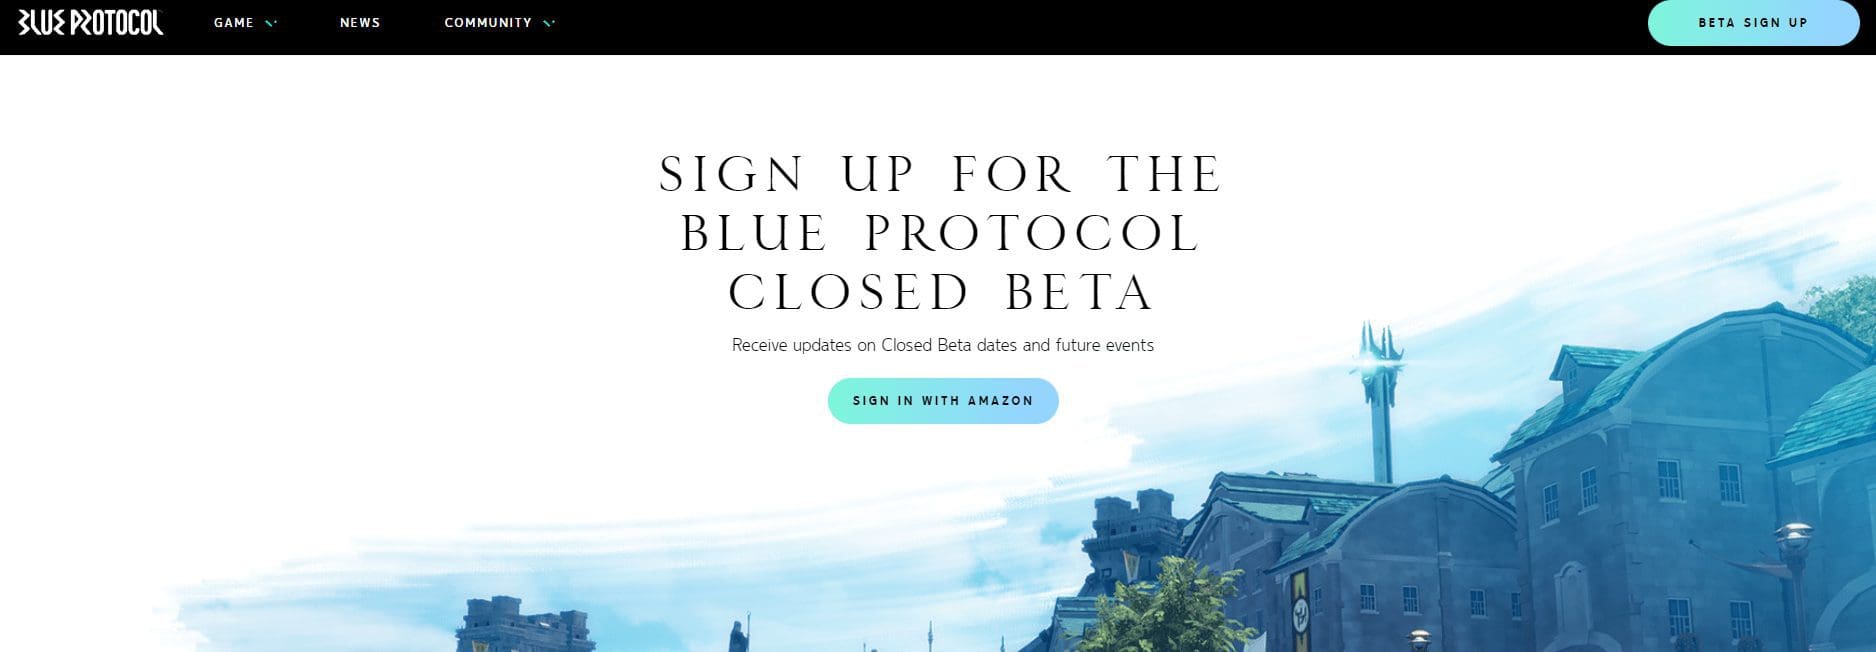 Blue Protocol GLOBAL RELEASE ANNOUNCED! Beta Sign Ups & More 